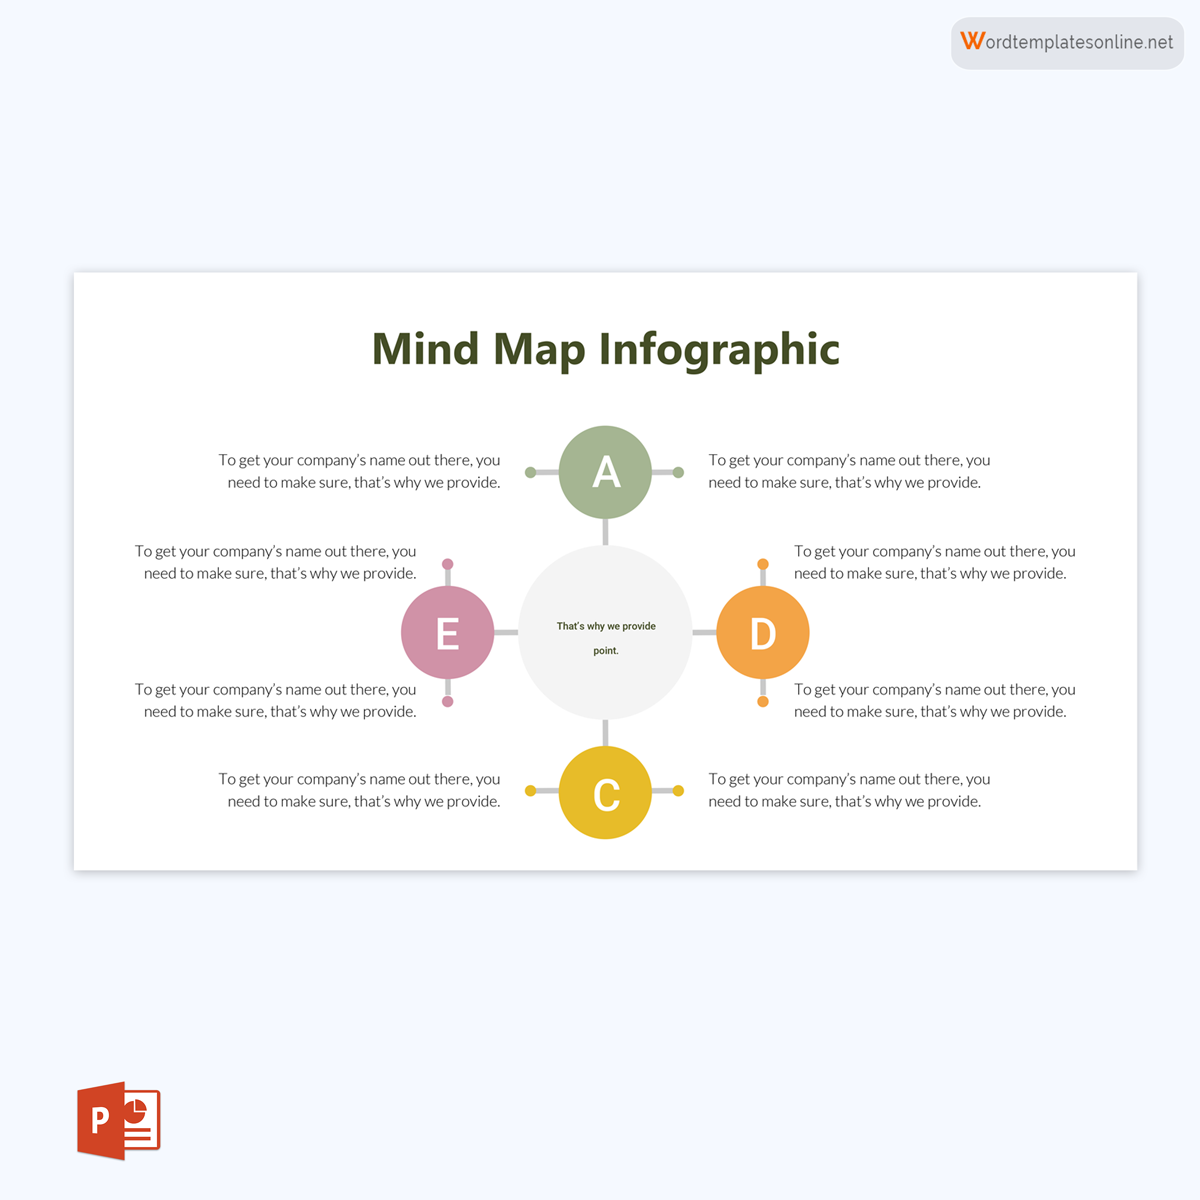 mind map template word